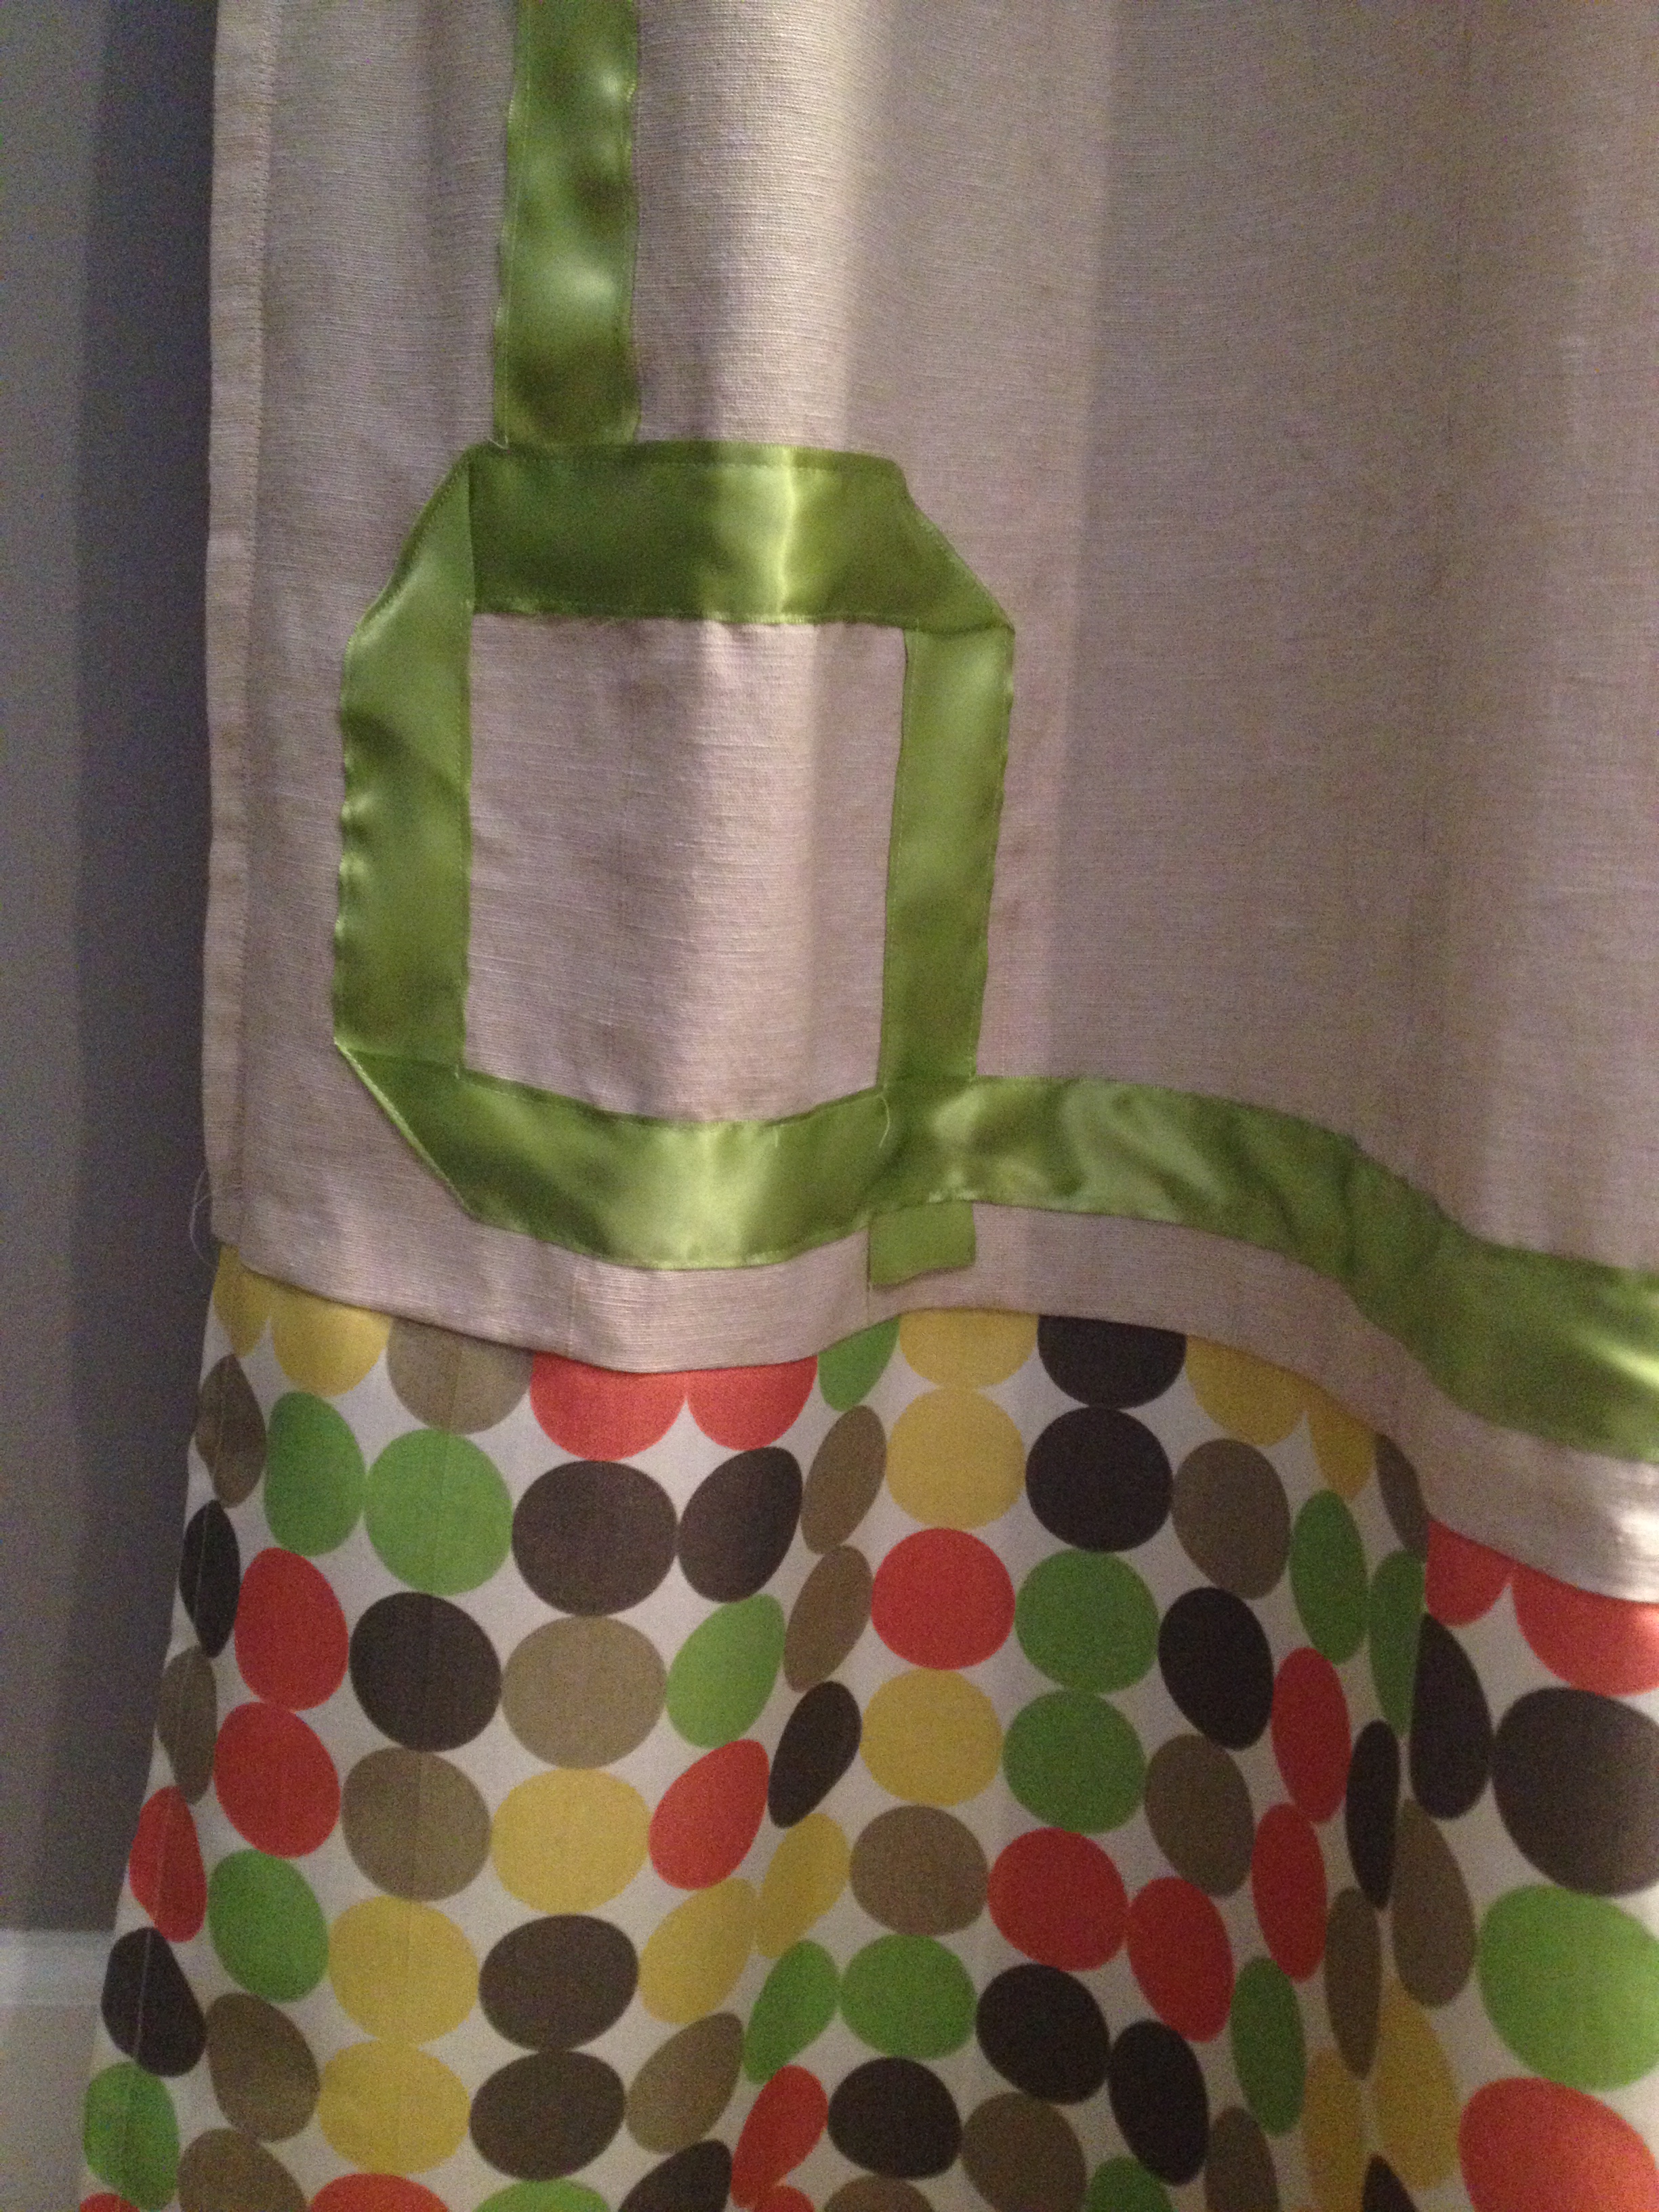 IKEA Curtains with Green Ribbon Detail and Polka Dot Fabric Added